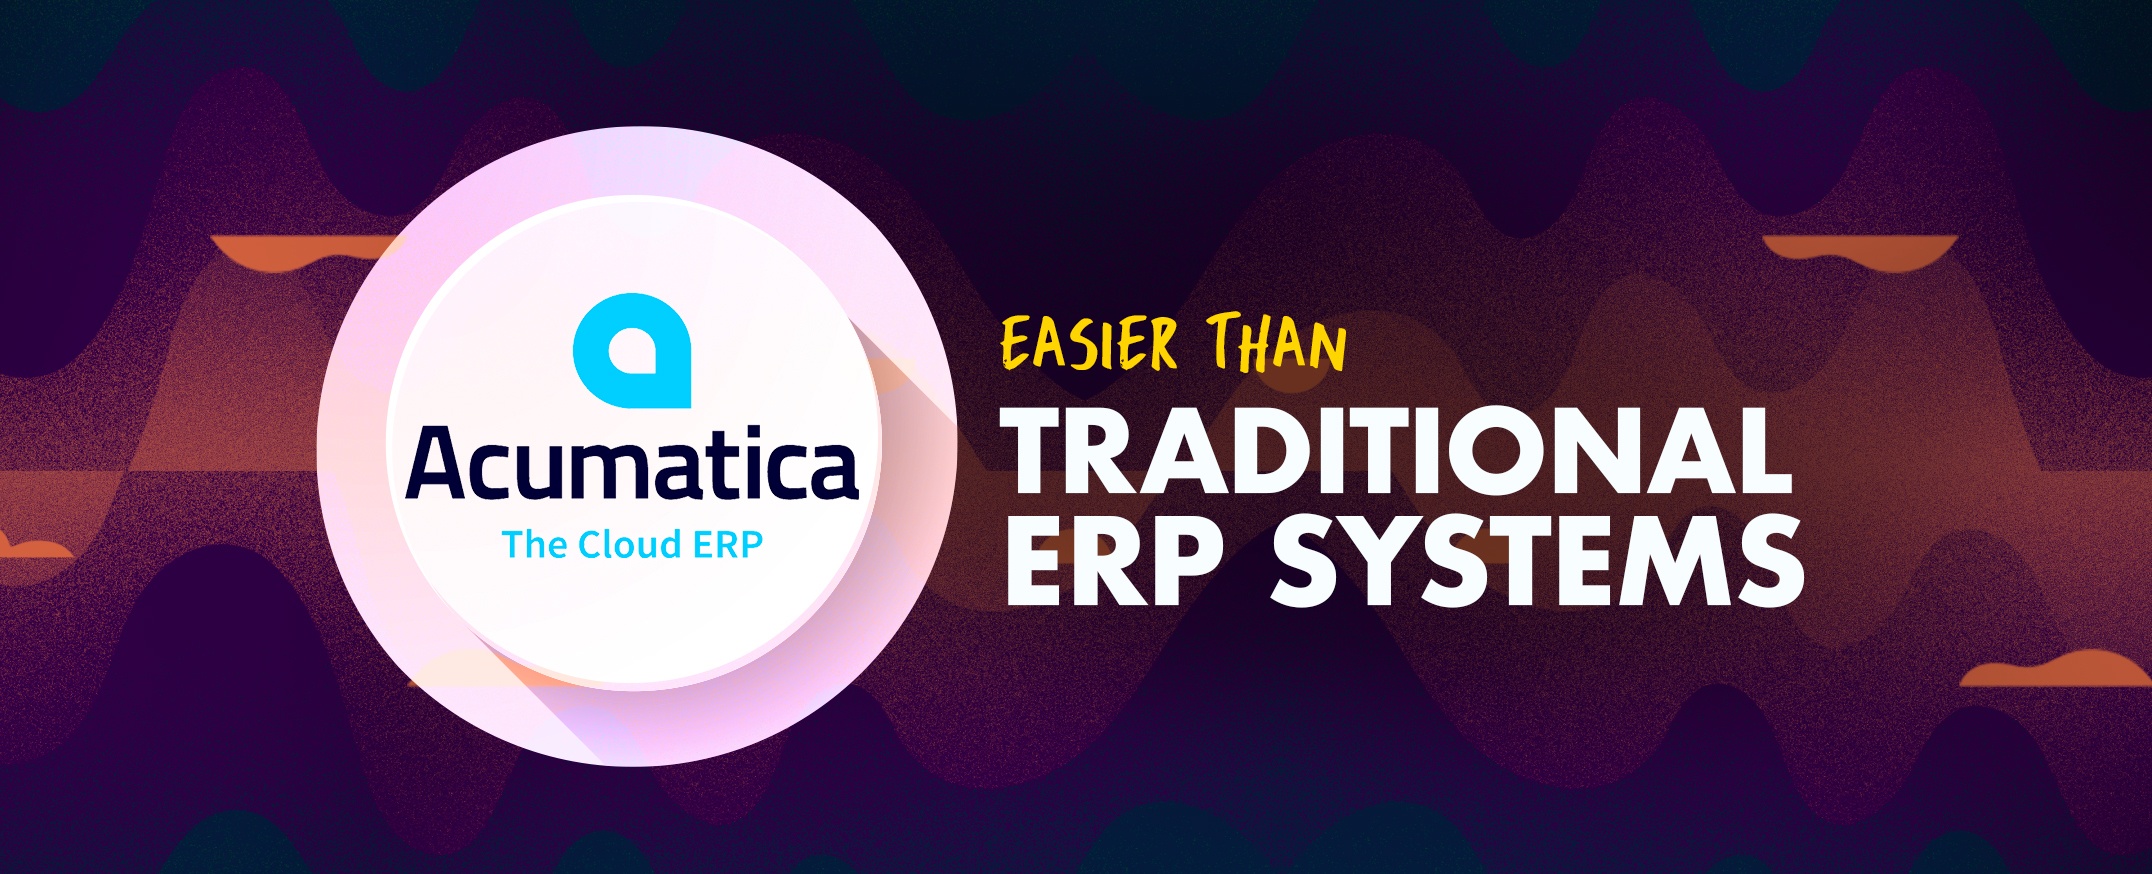 Acumatica-is-easier-to-use-than-Traditional-ERP-systems